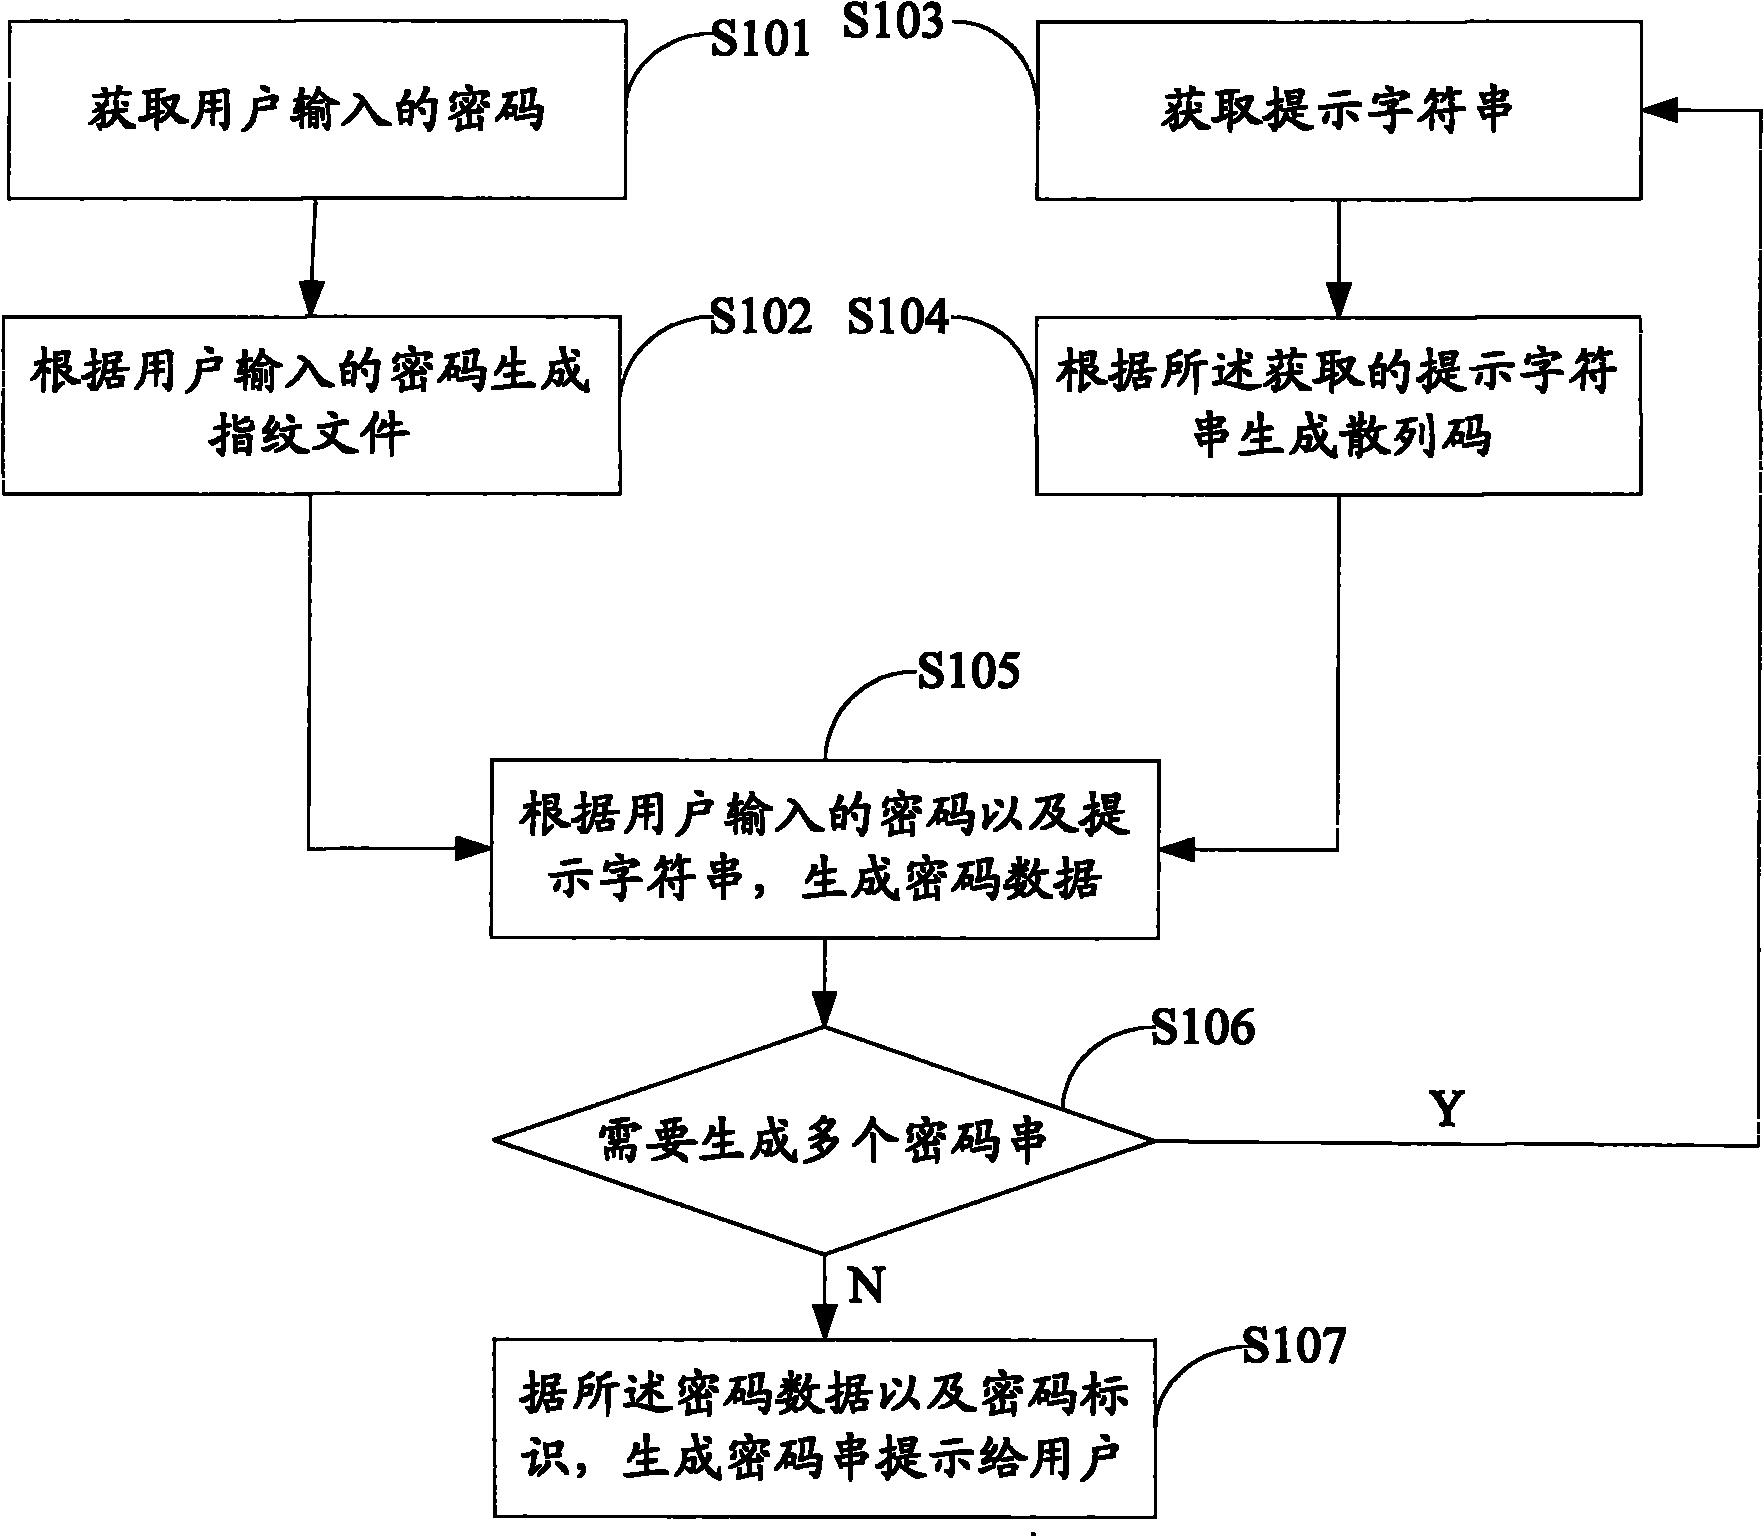 Method and device for generating password string